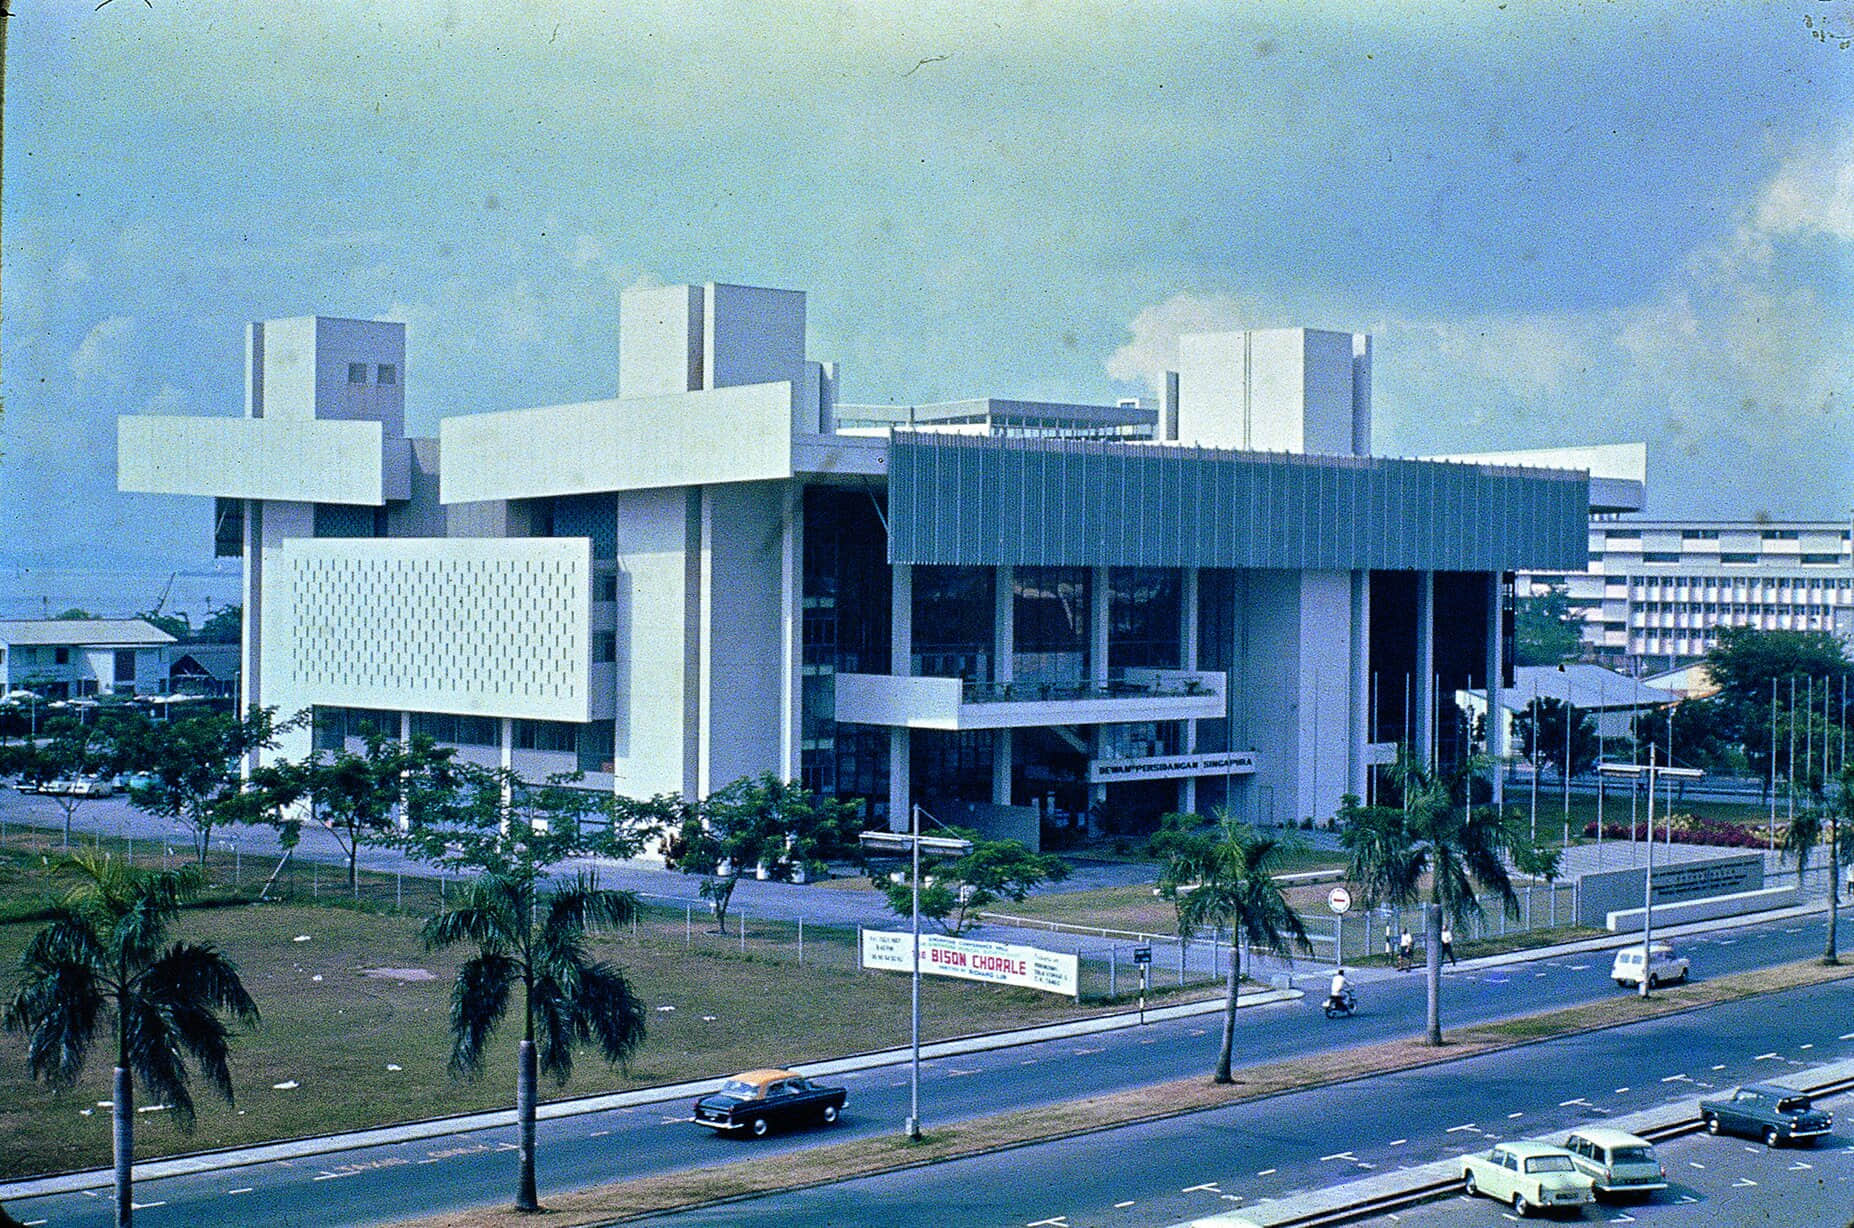 National Trades Union Congress (NTUC) Conference Hall, 1961-65. 正立面透视图、剖面图、建成照片